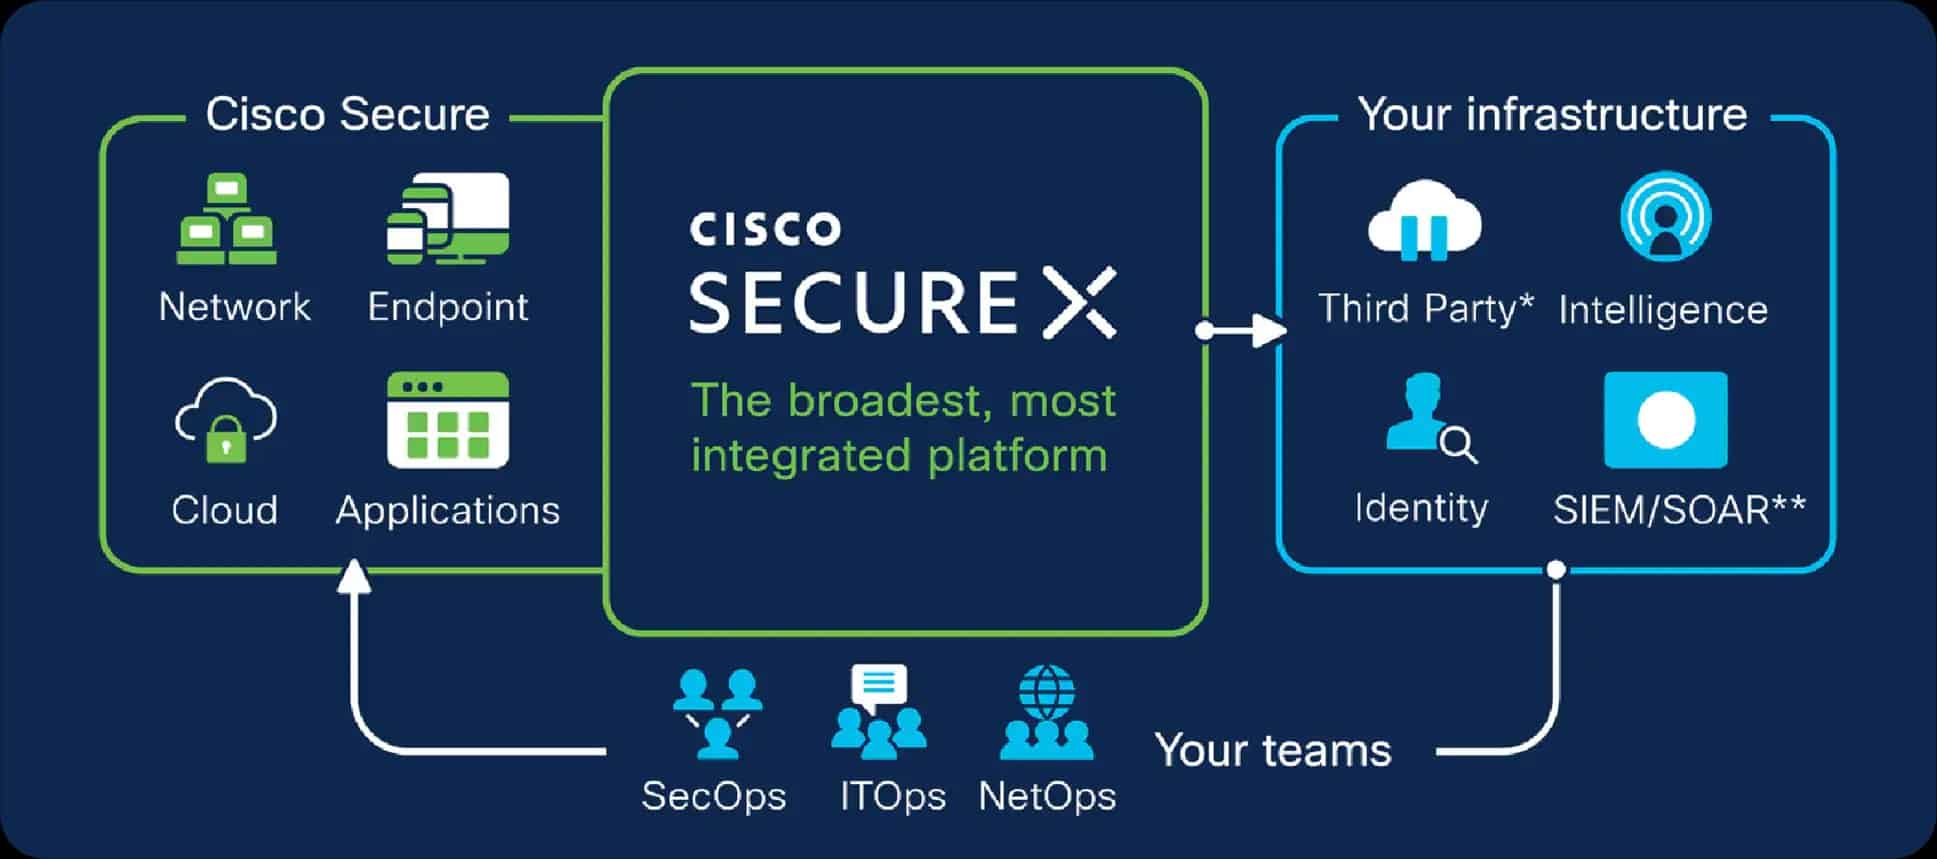 Cisco Secure Email - most integratable gateway solution